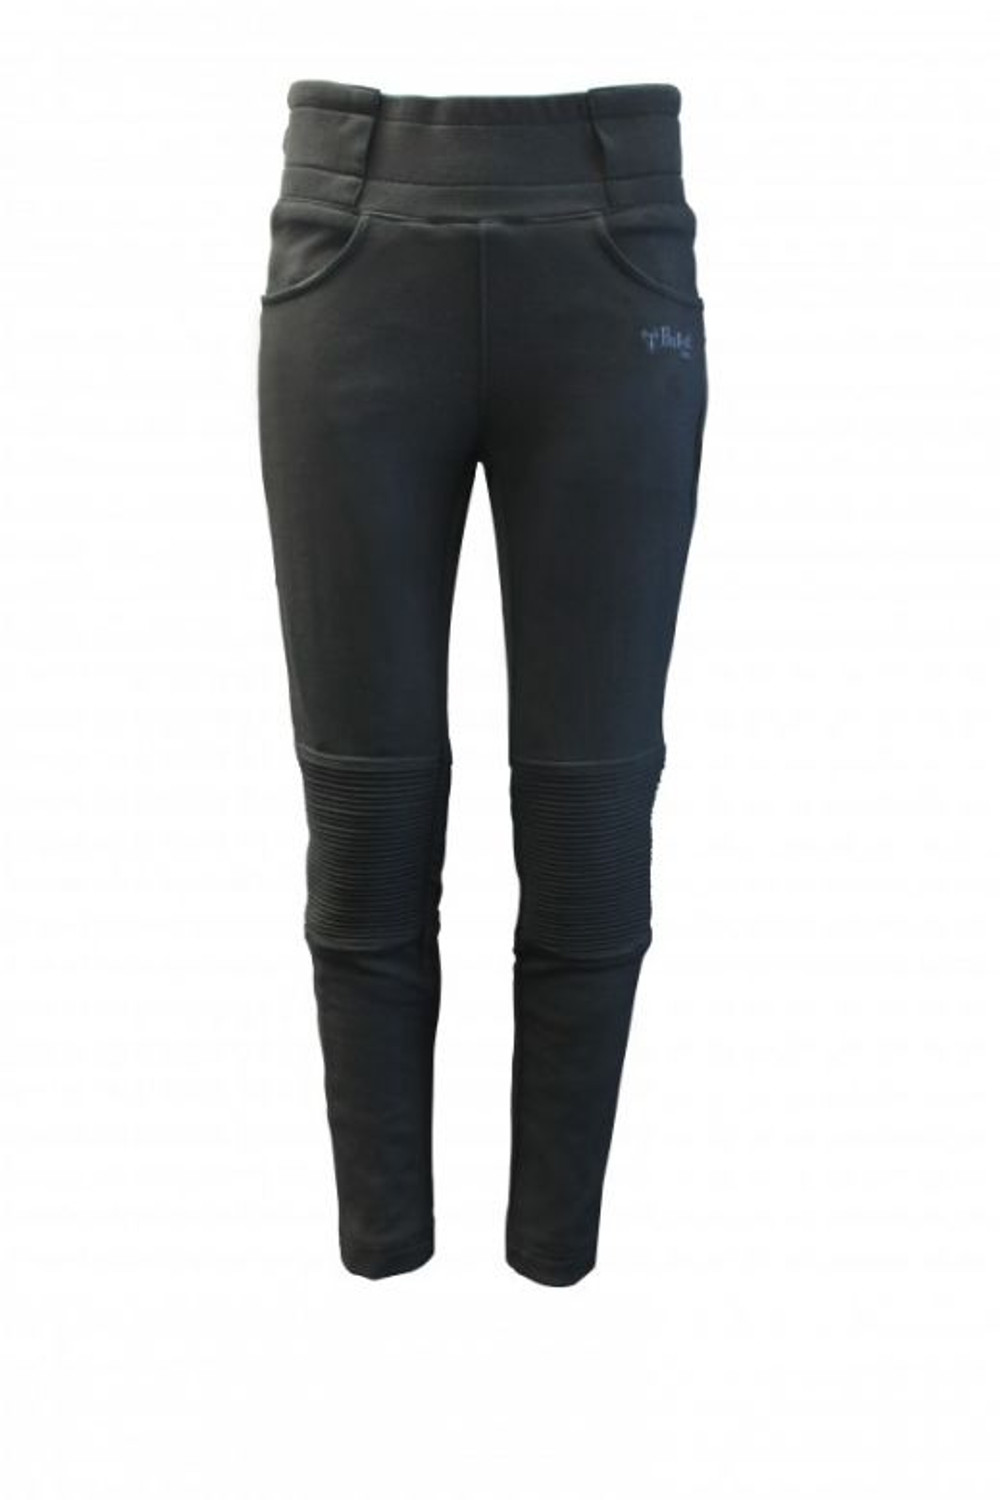 Oxford Womens Bull-It Webtech Envy Leggings - Motorcycle Closeouts by Rider  Approved LLC